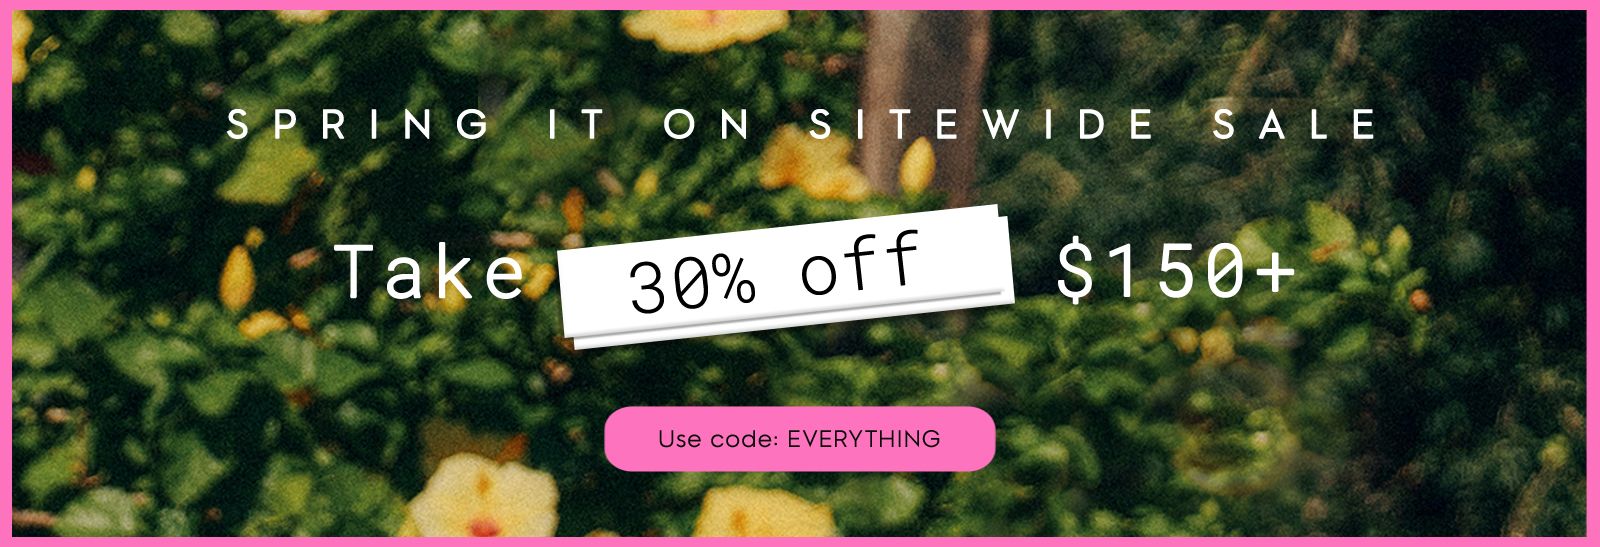 Sitewide Sale Take 30% off $150+